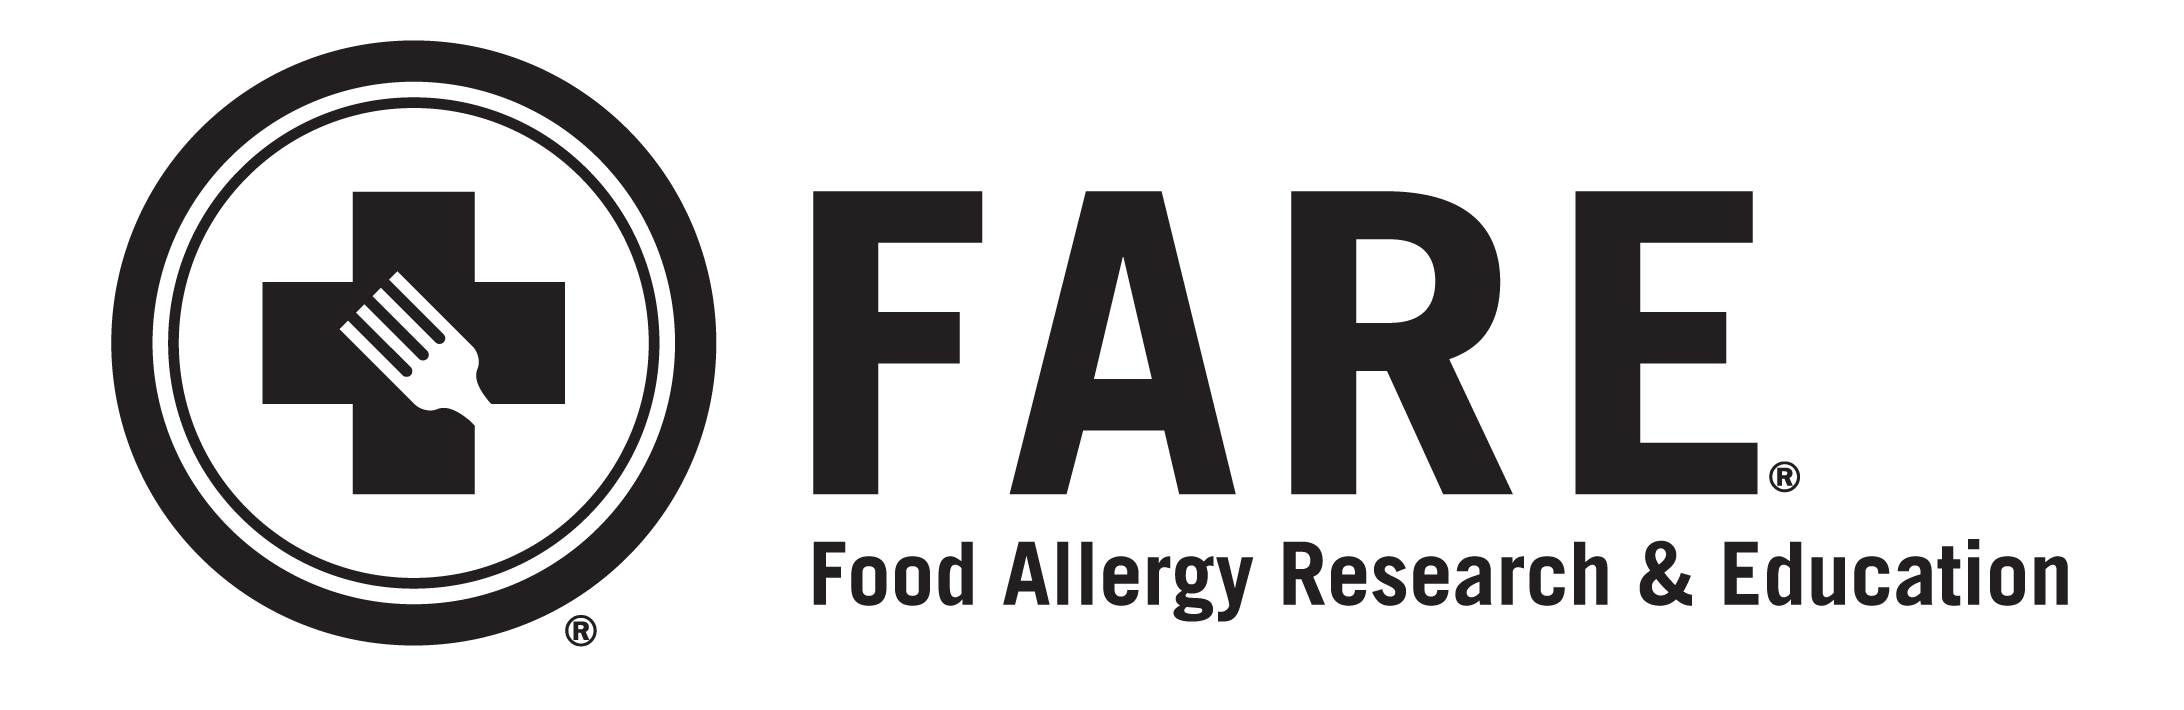 FARE - Food Allergy Research & Education